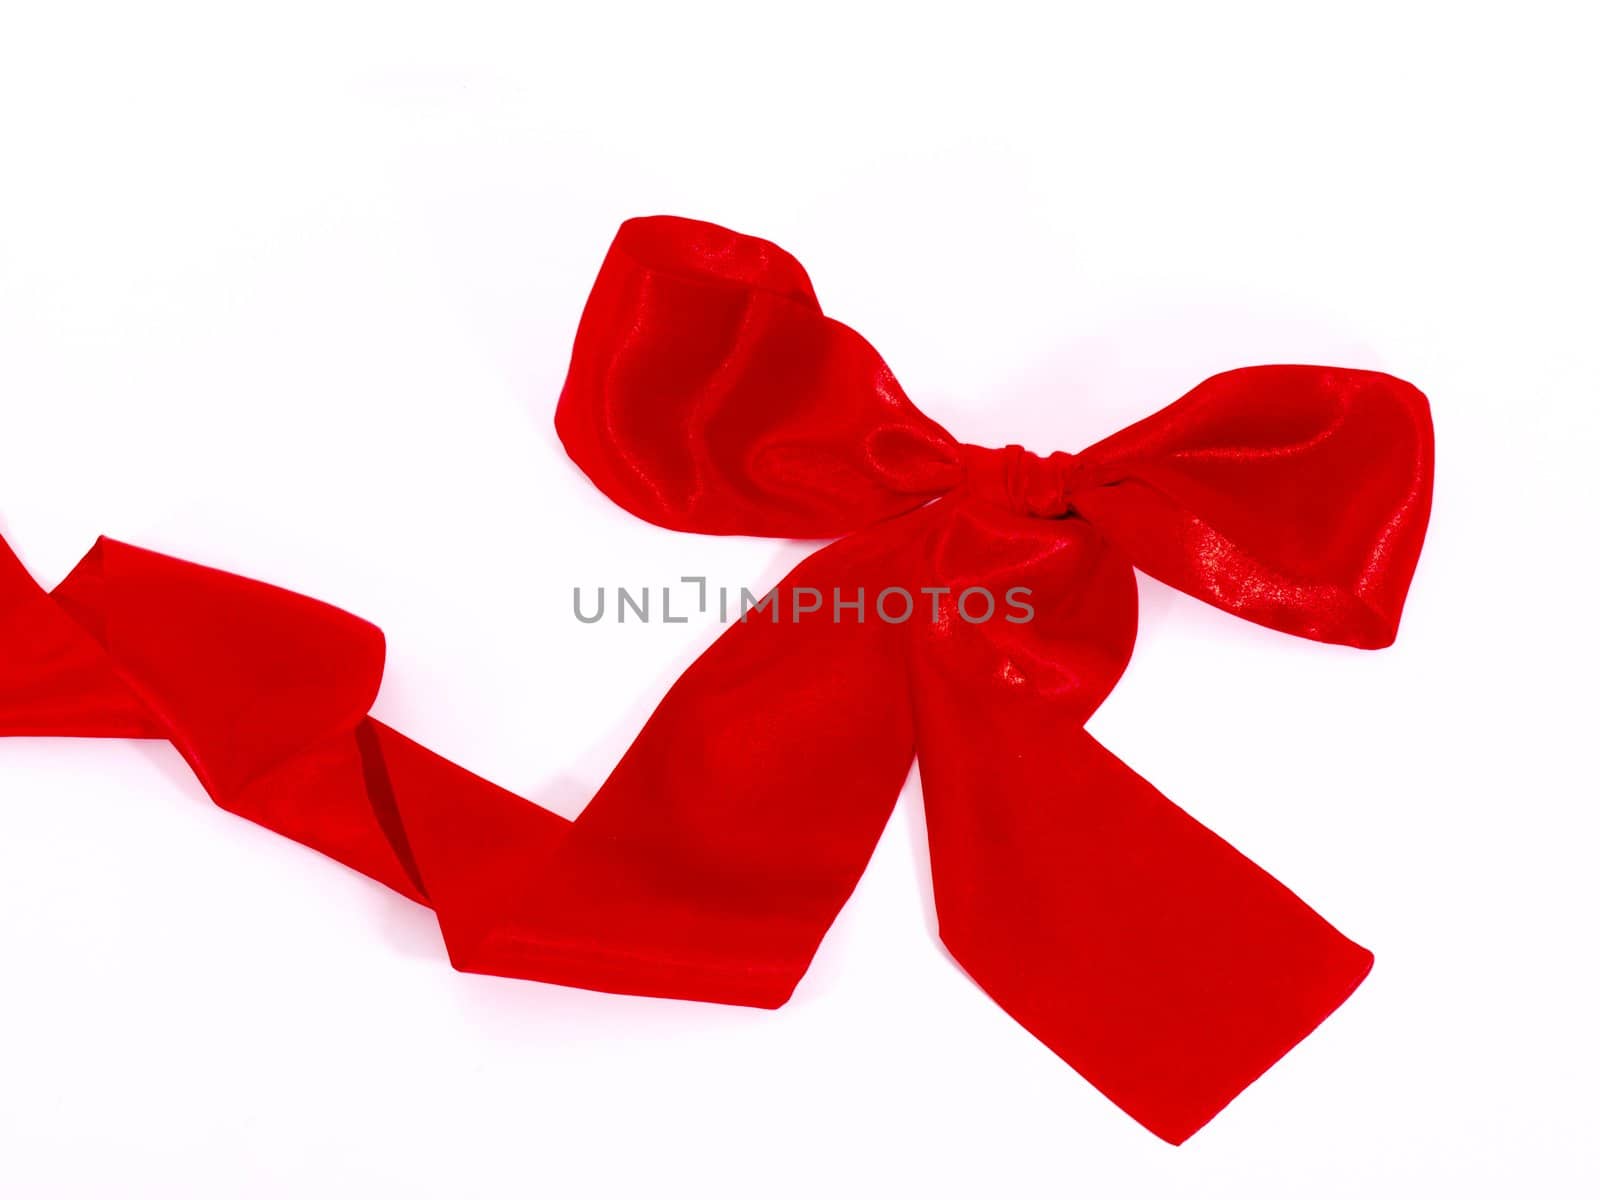 Red scarf tied as a ribbon on white background